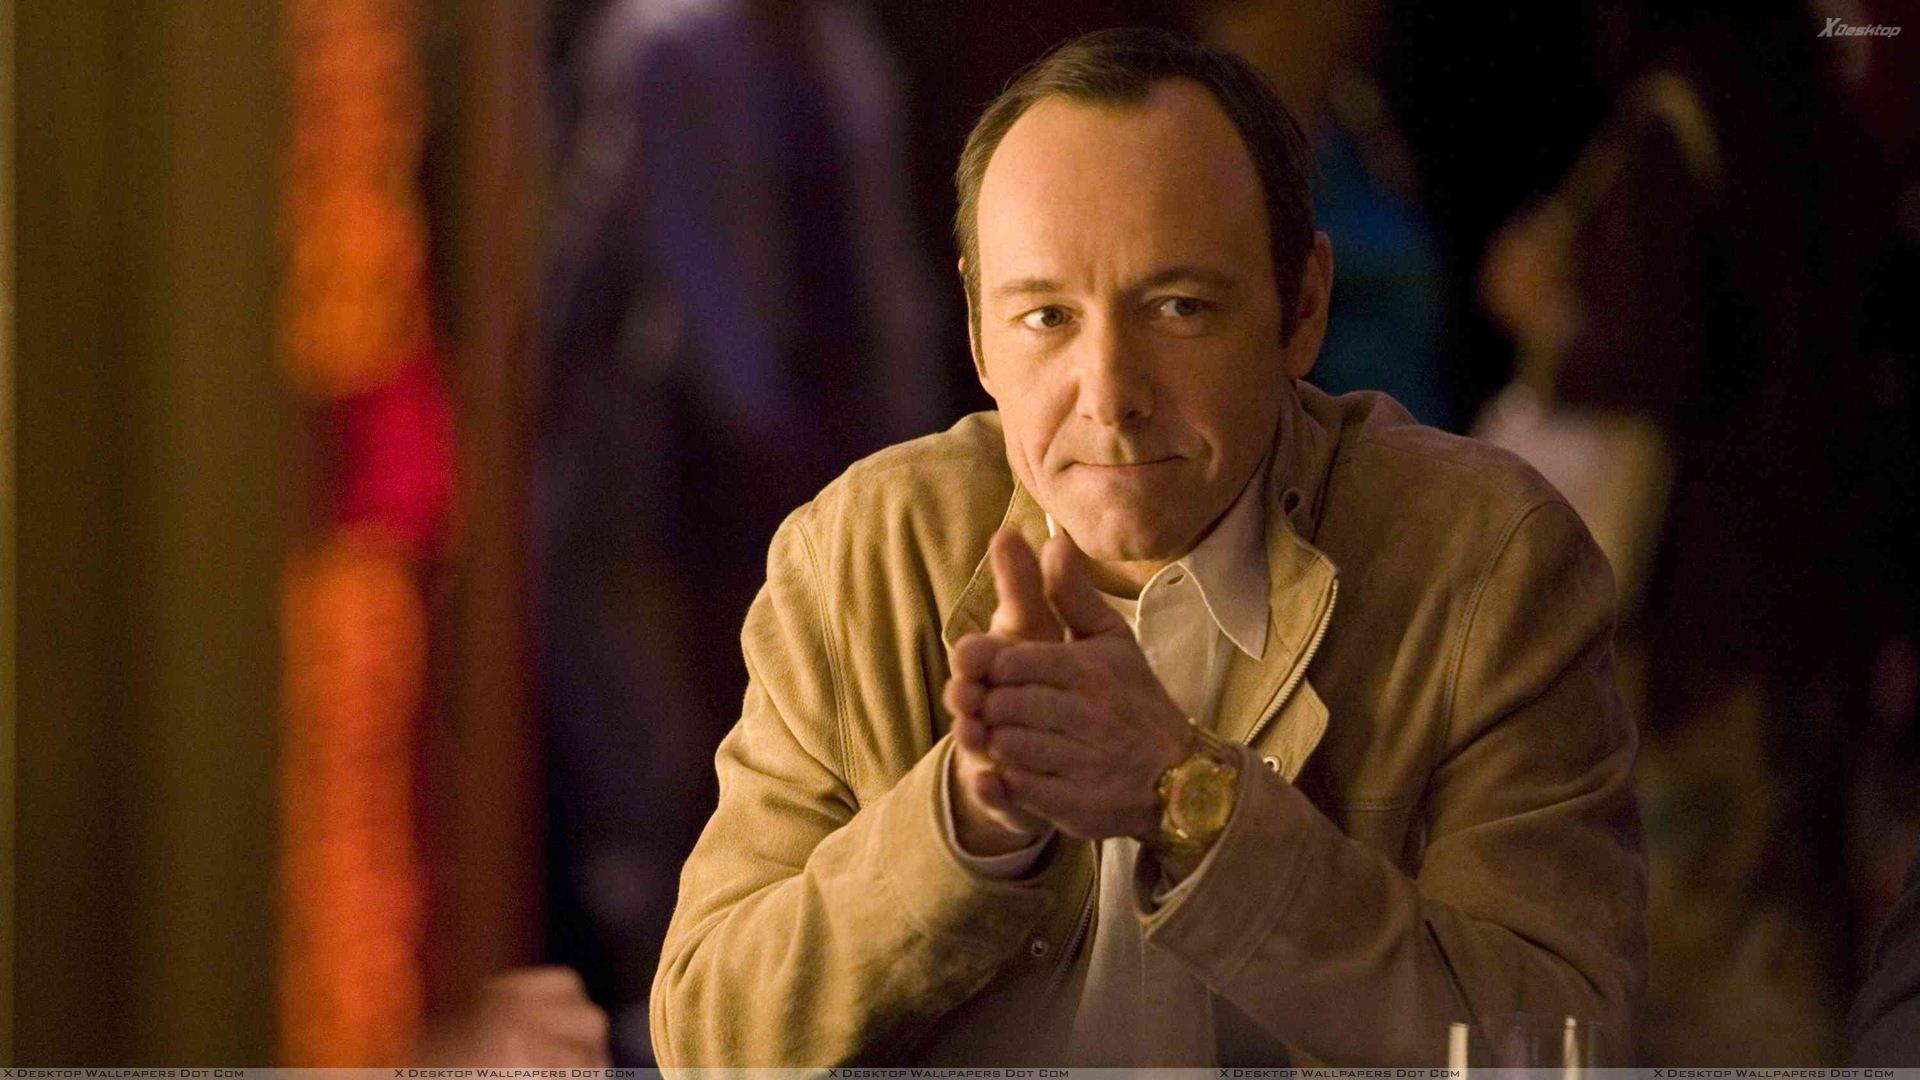 Kevin Spacey Wallpaper, Photo & Image in HD